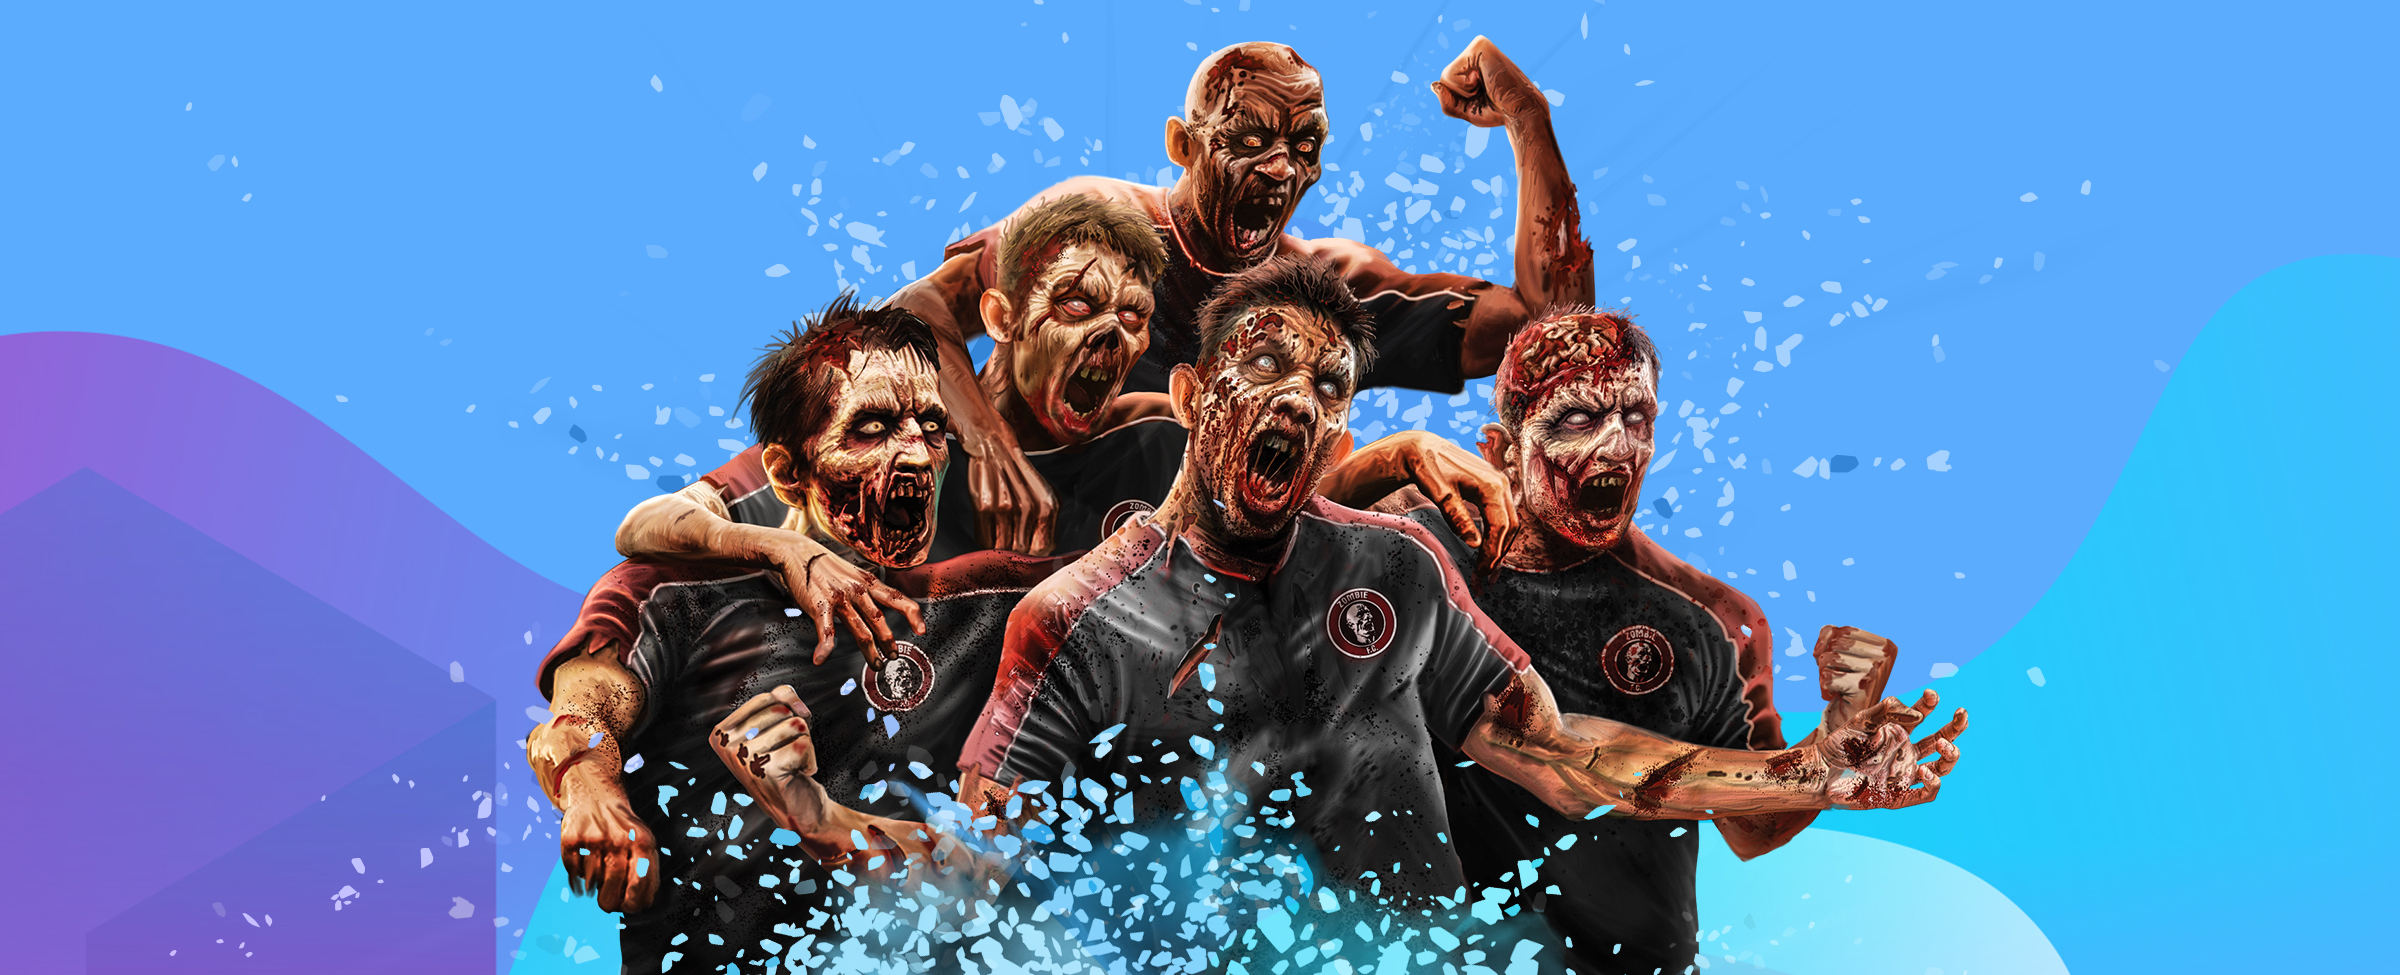 If you’re into zombies as much as football, we have the perfect slots game for you: Zombie FC! How does it work? Read on to find out.